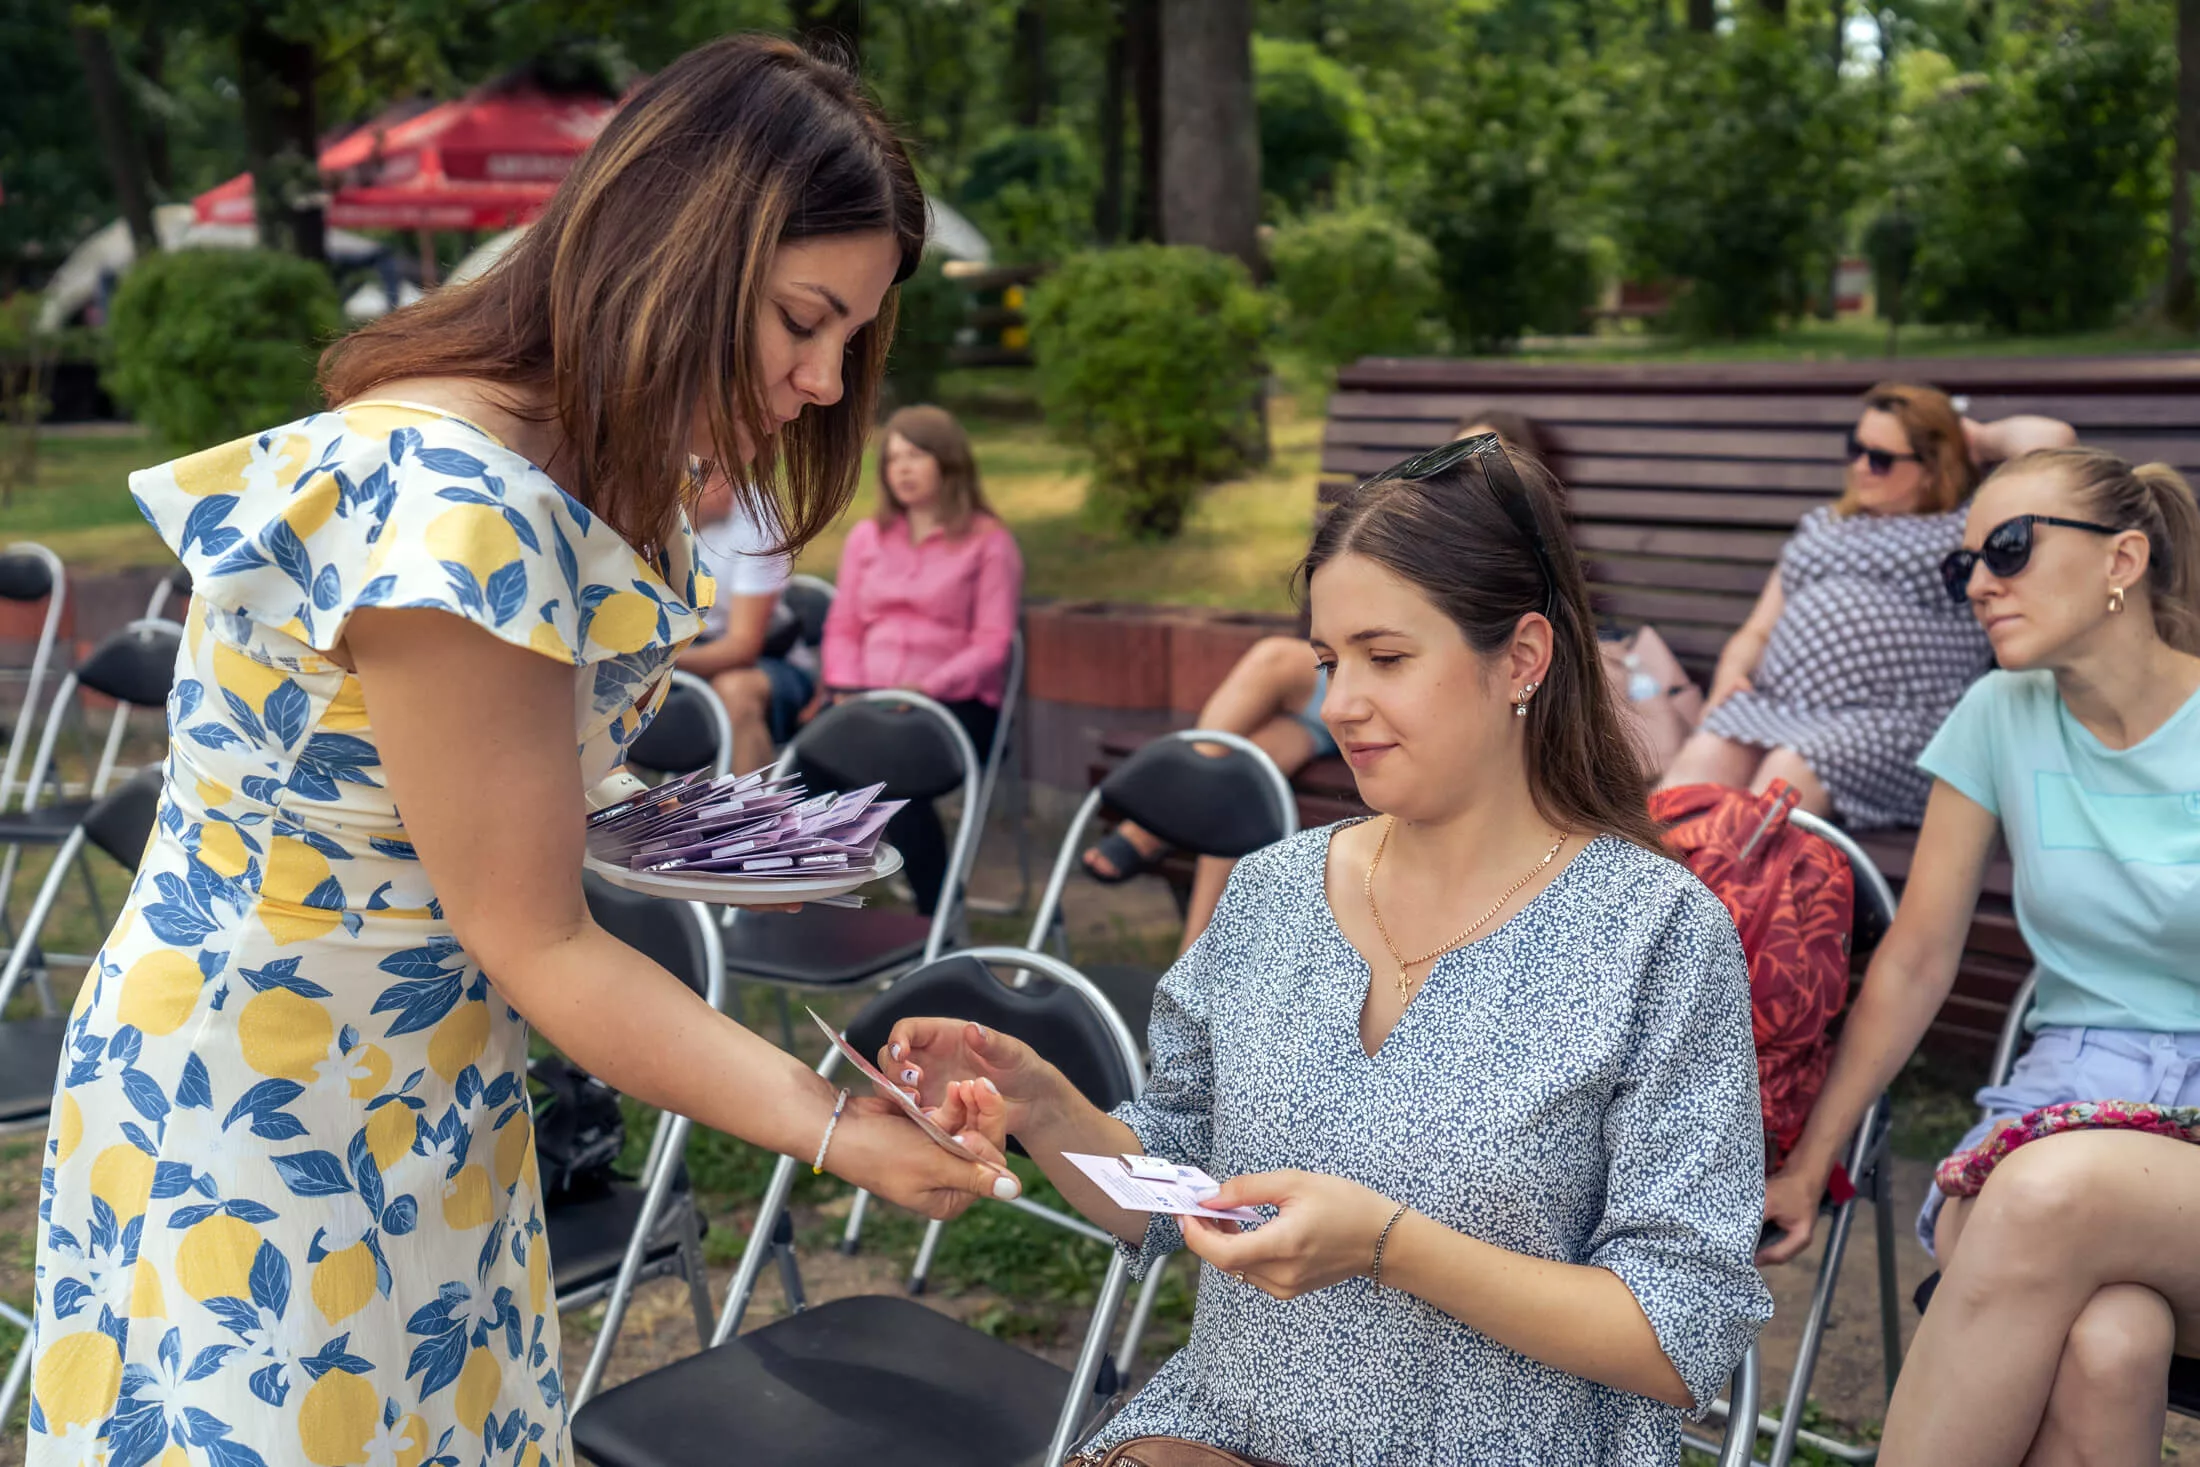 International Medical Corps staff members in Ukraine conduct lectures, gather information and hand out materials at an event for young parents and parents-to-be.